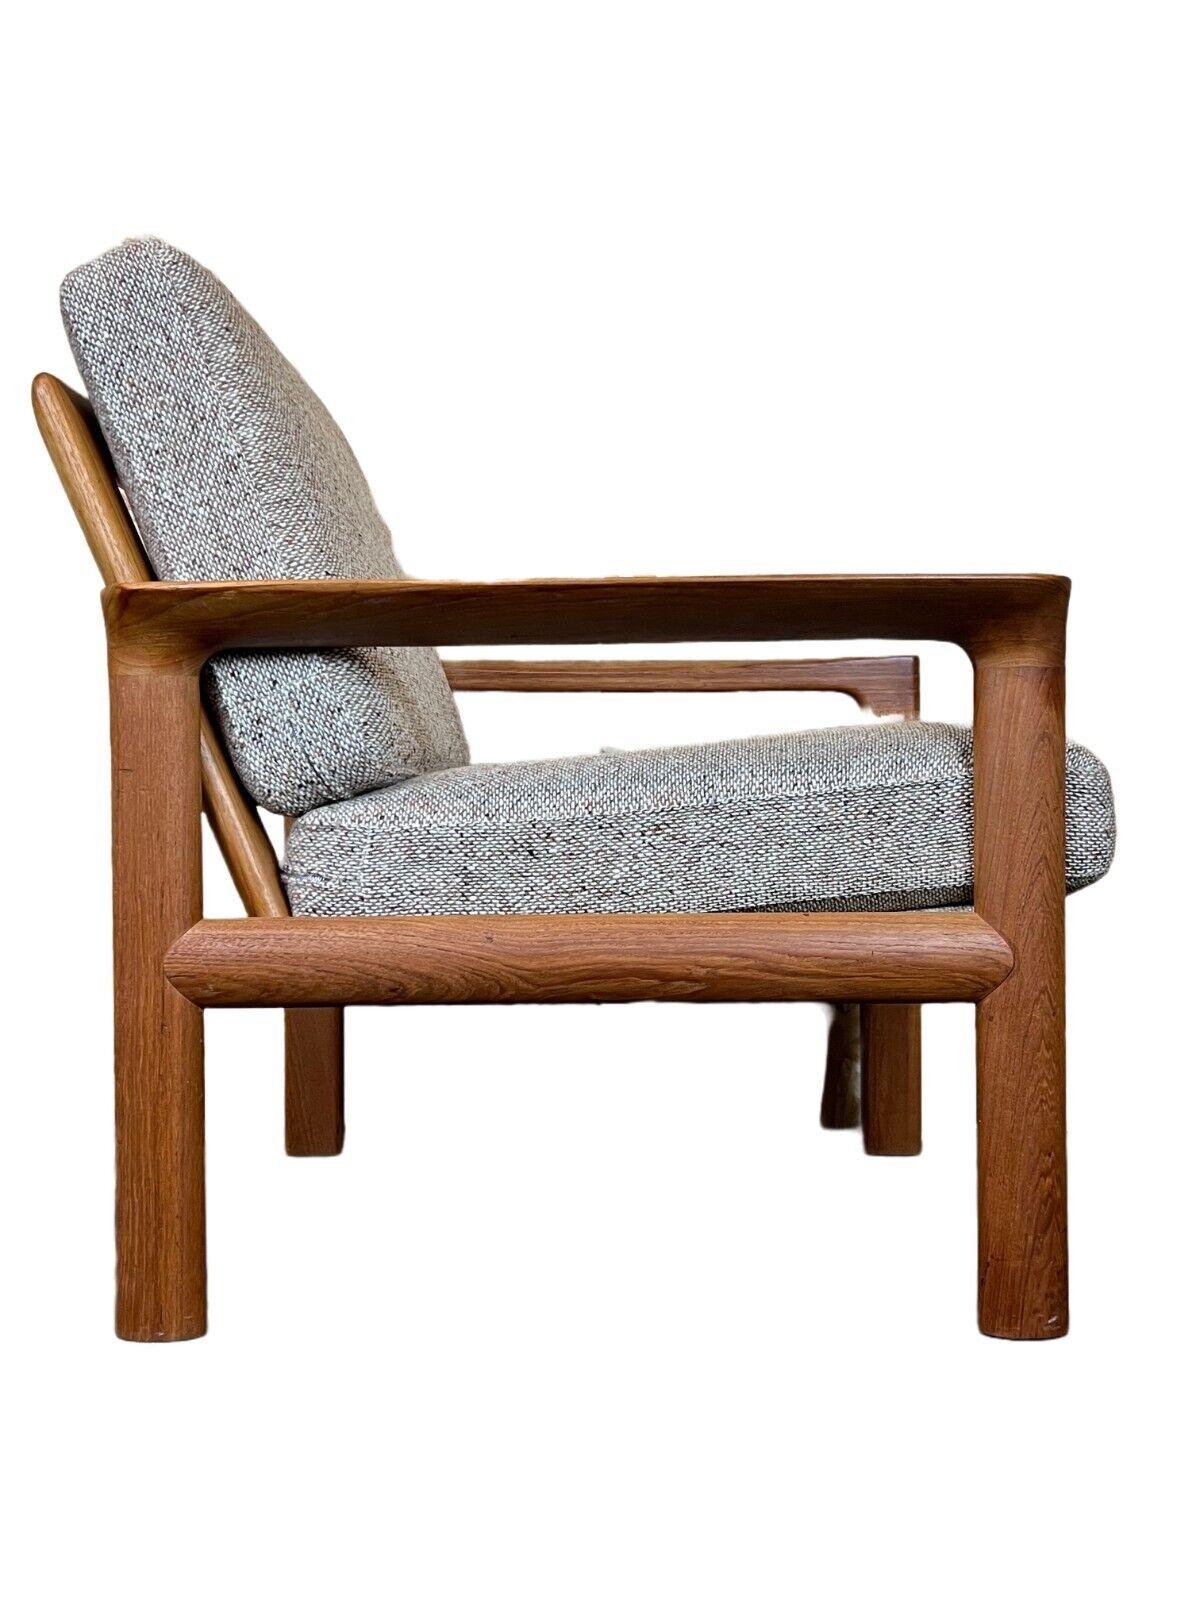 60s 70s Teak Easy Chair Sven Ellekaer for Komfort Design Denmark

Object: Easy Chair

Manufacturer: comfort

Condition: good - vintage

Age: around 1960-1970

Dimensions:

Width = 76cm
Depth = 82cm
Height = 82cm
Seat height = 45cm

Other notes:

The